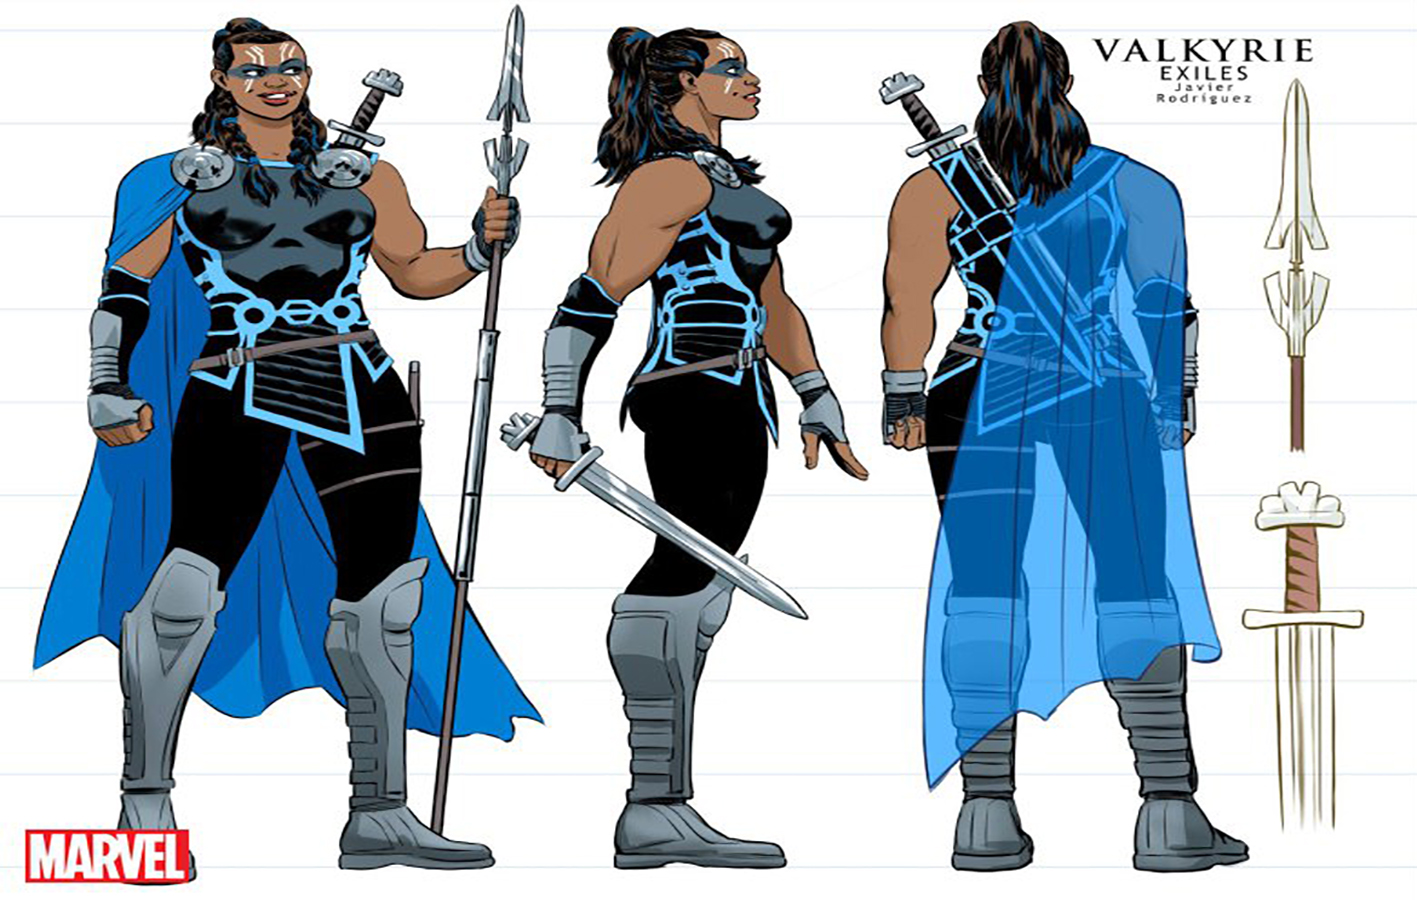 Tessa Thompson’s Valkyrie To Get Marvel Comics Treatment in Upcoming ‘Exiles’ Book